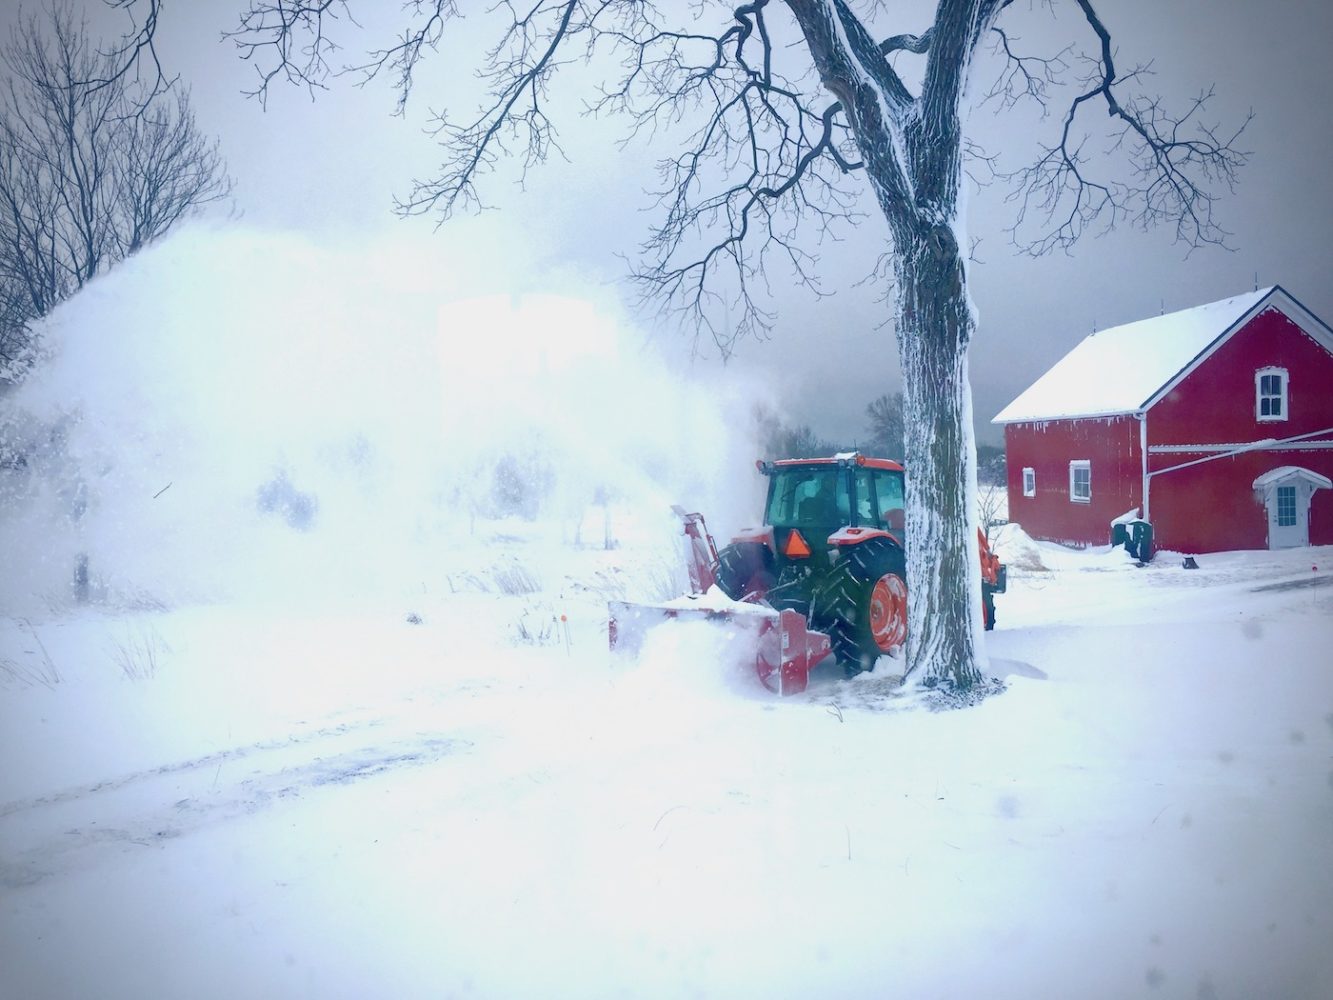 Buying Insurance For My Snow Plowing Business In Canada - ALIGNED Insurance Brokers